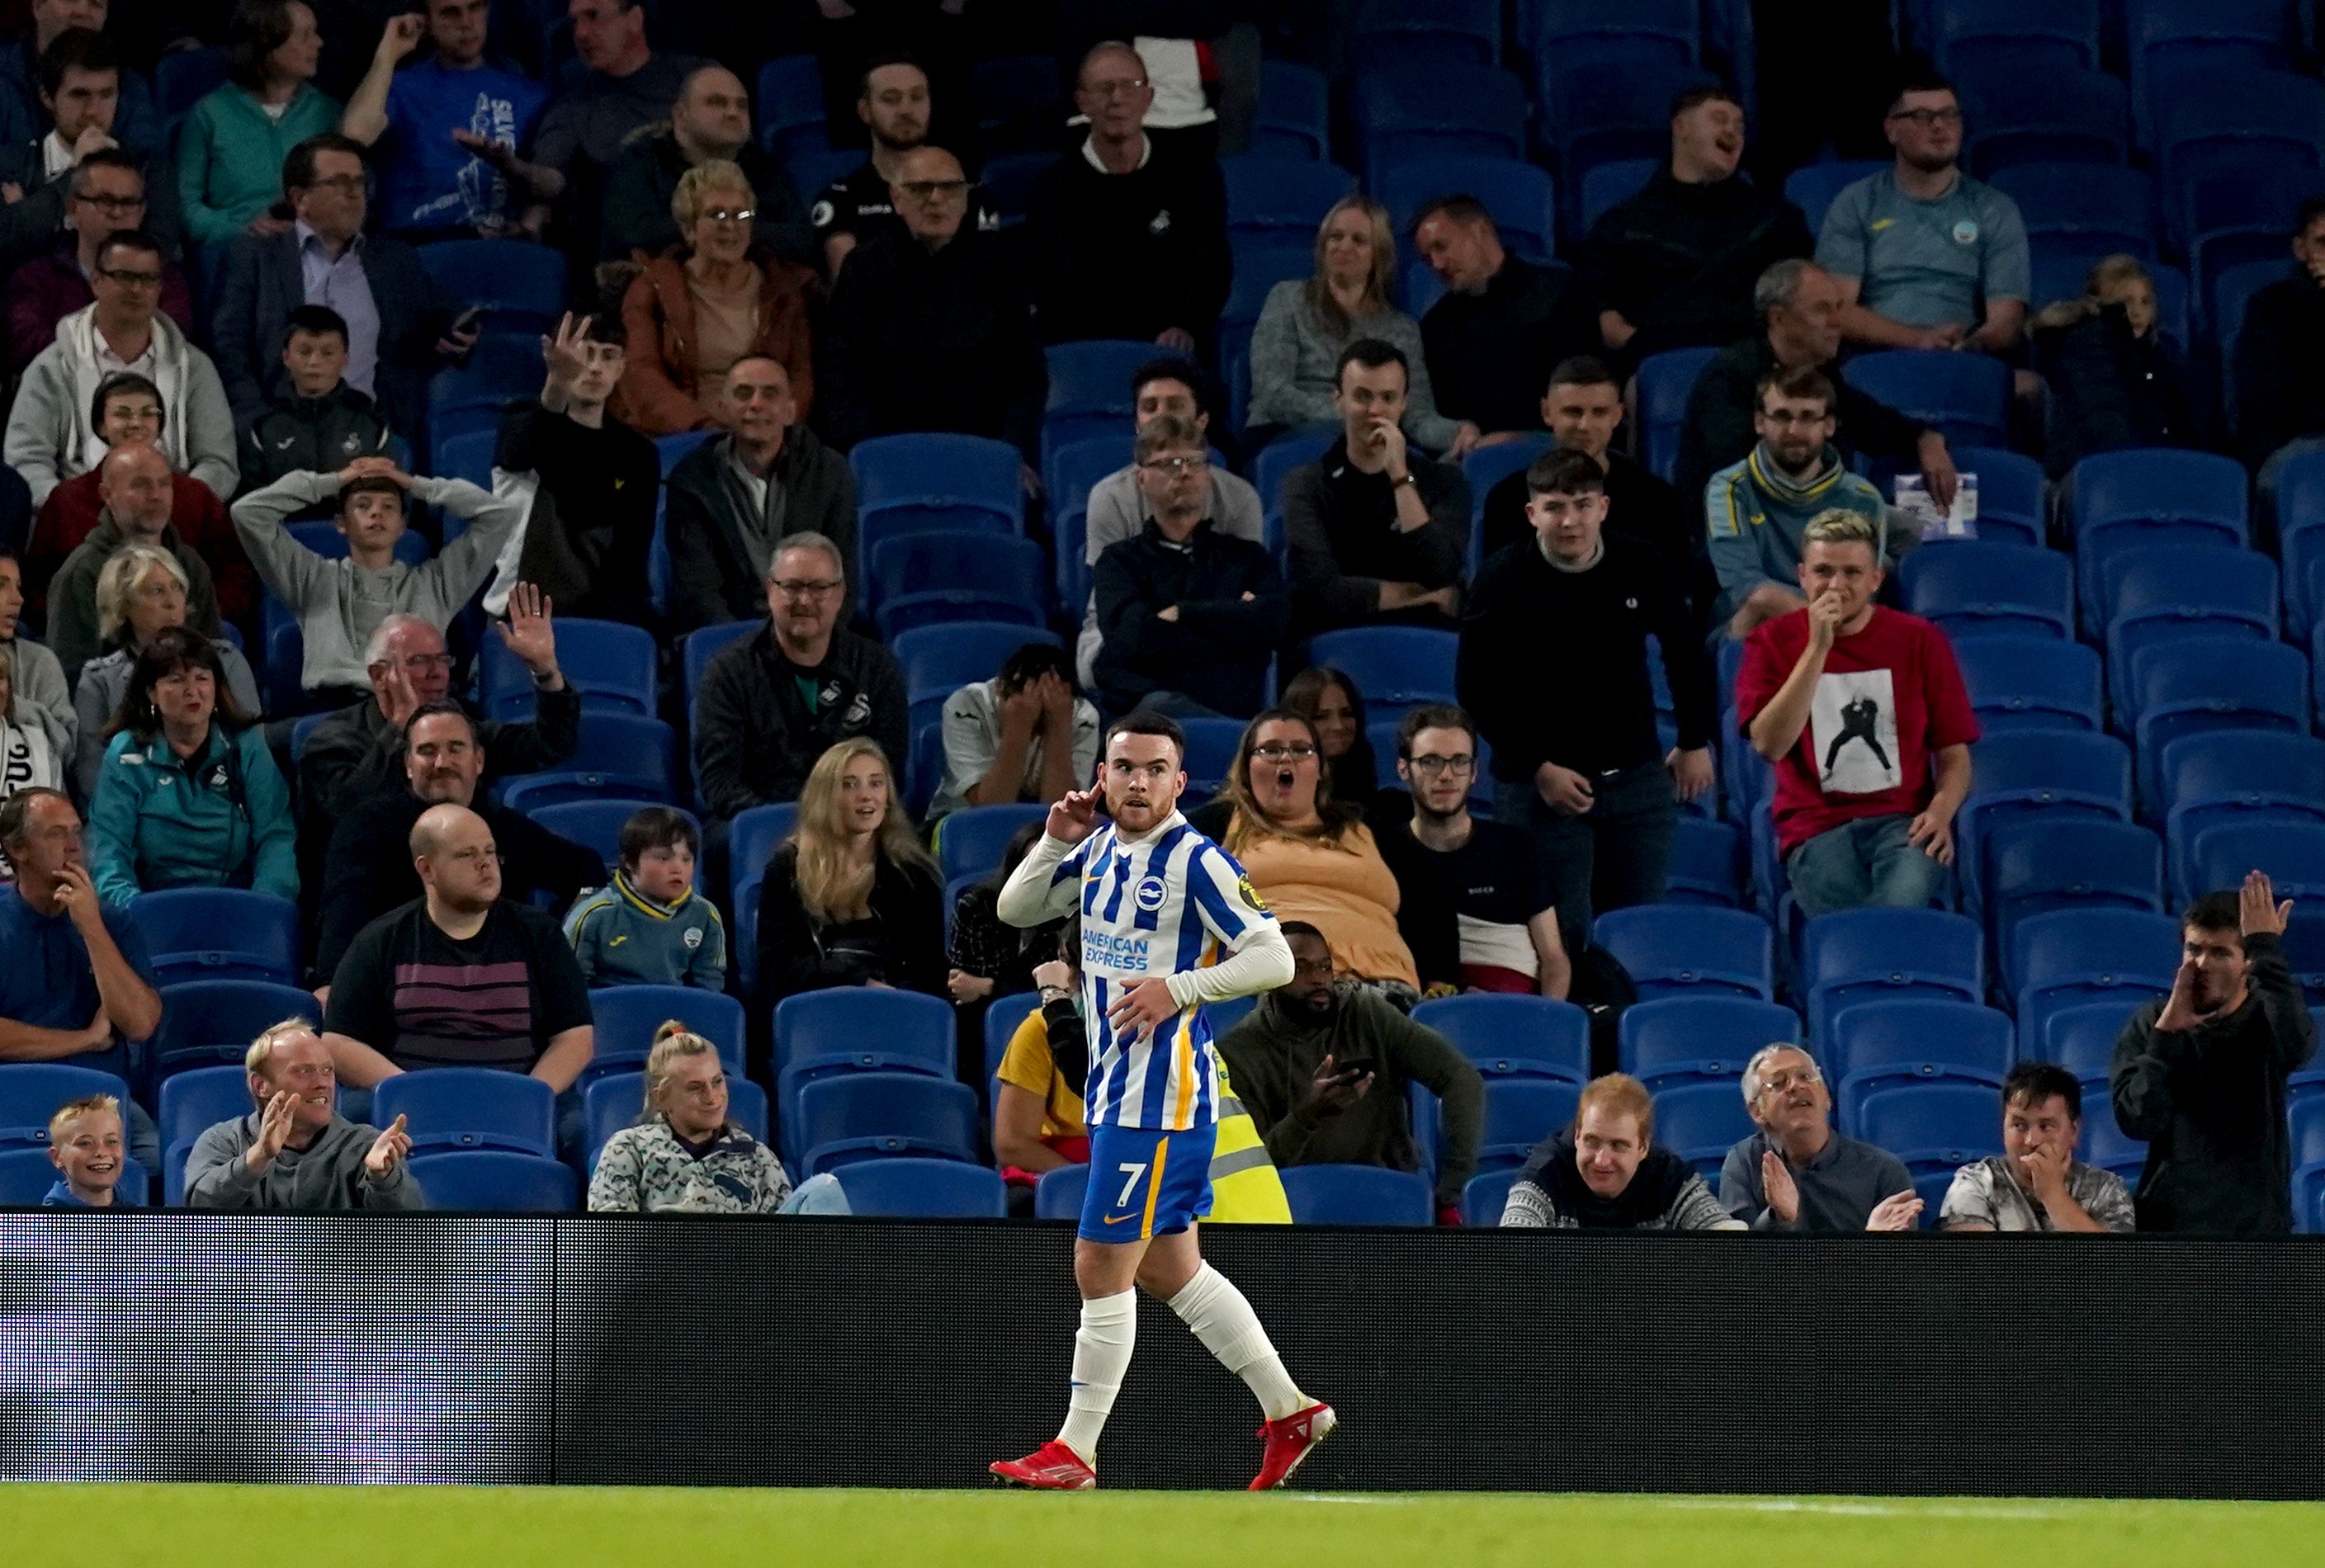 Aaron Connolly struck twice to ensure Brighton’s place in the Carabao Cup fourth round after a 2-0 win over Swansea (Gareth Fuller/PA)